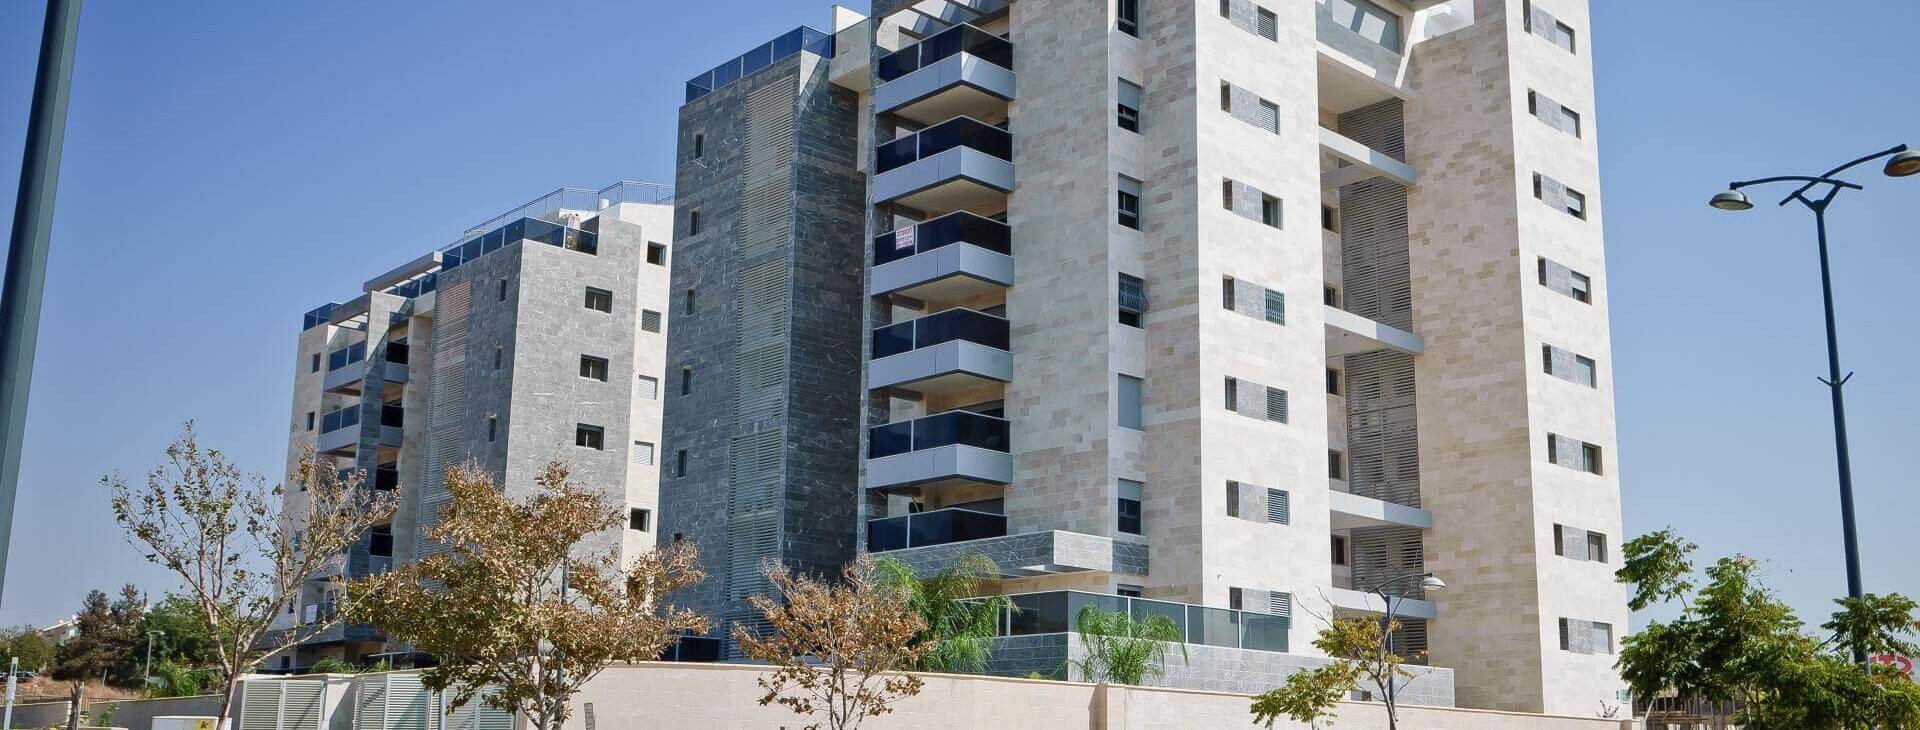 Photograph of buildings in the NOTAN project in Herzliya